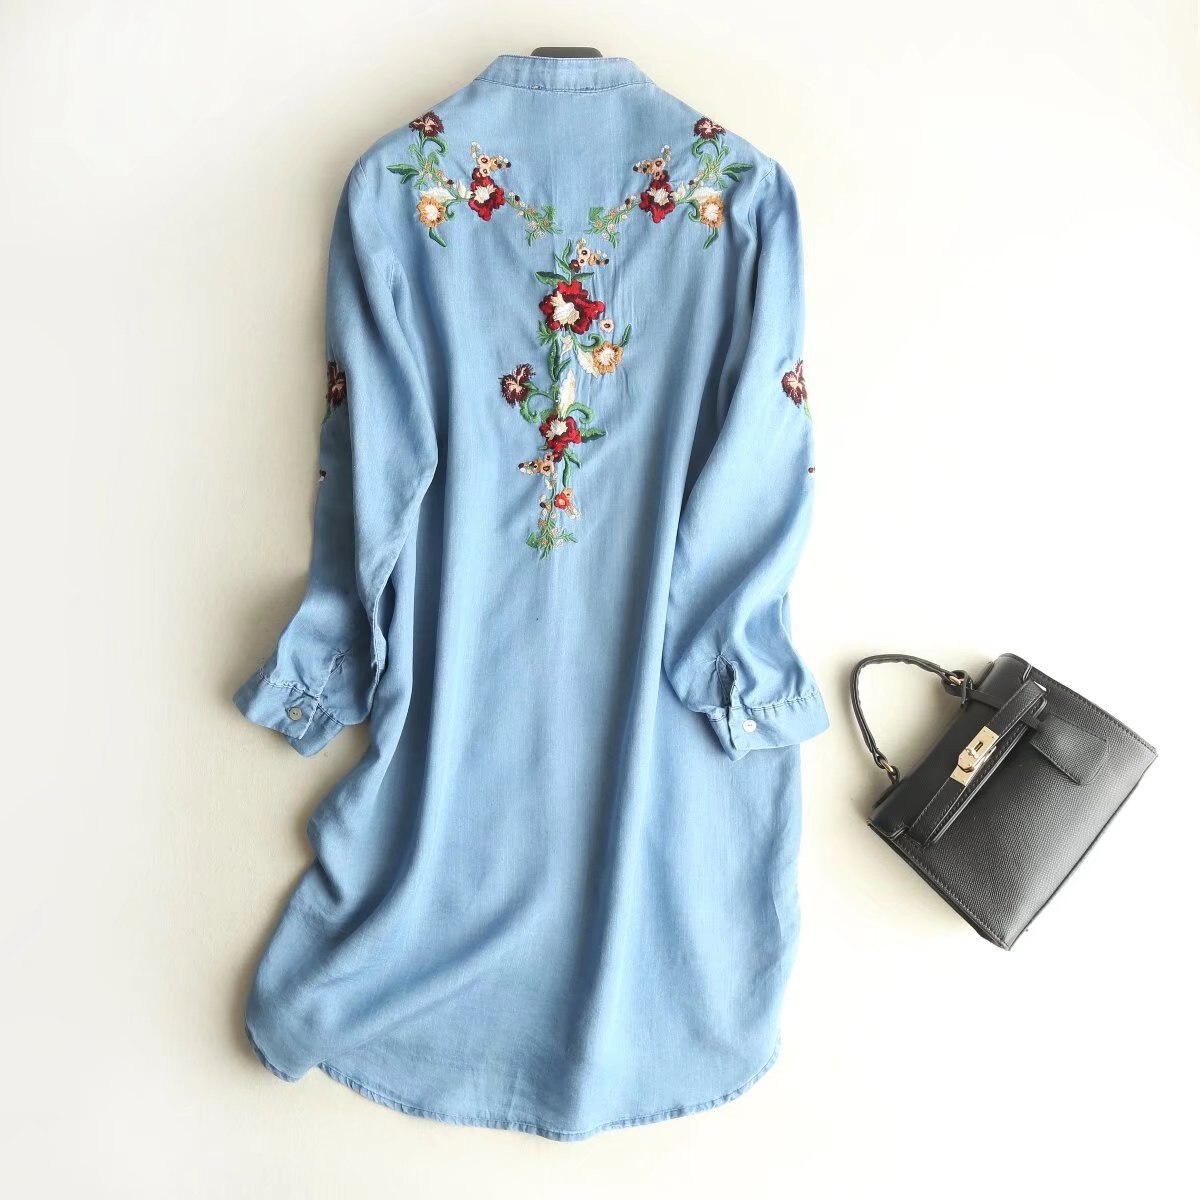 Women Long Sleeve Flower Embroidery Cotton Denim Soft Blouse Shirts Loose Tops